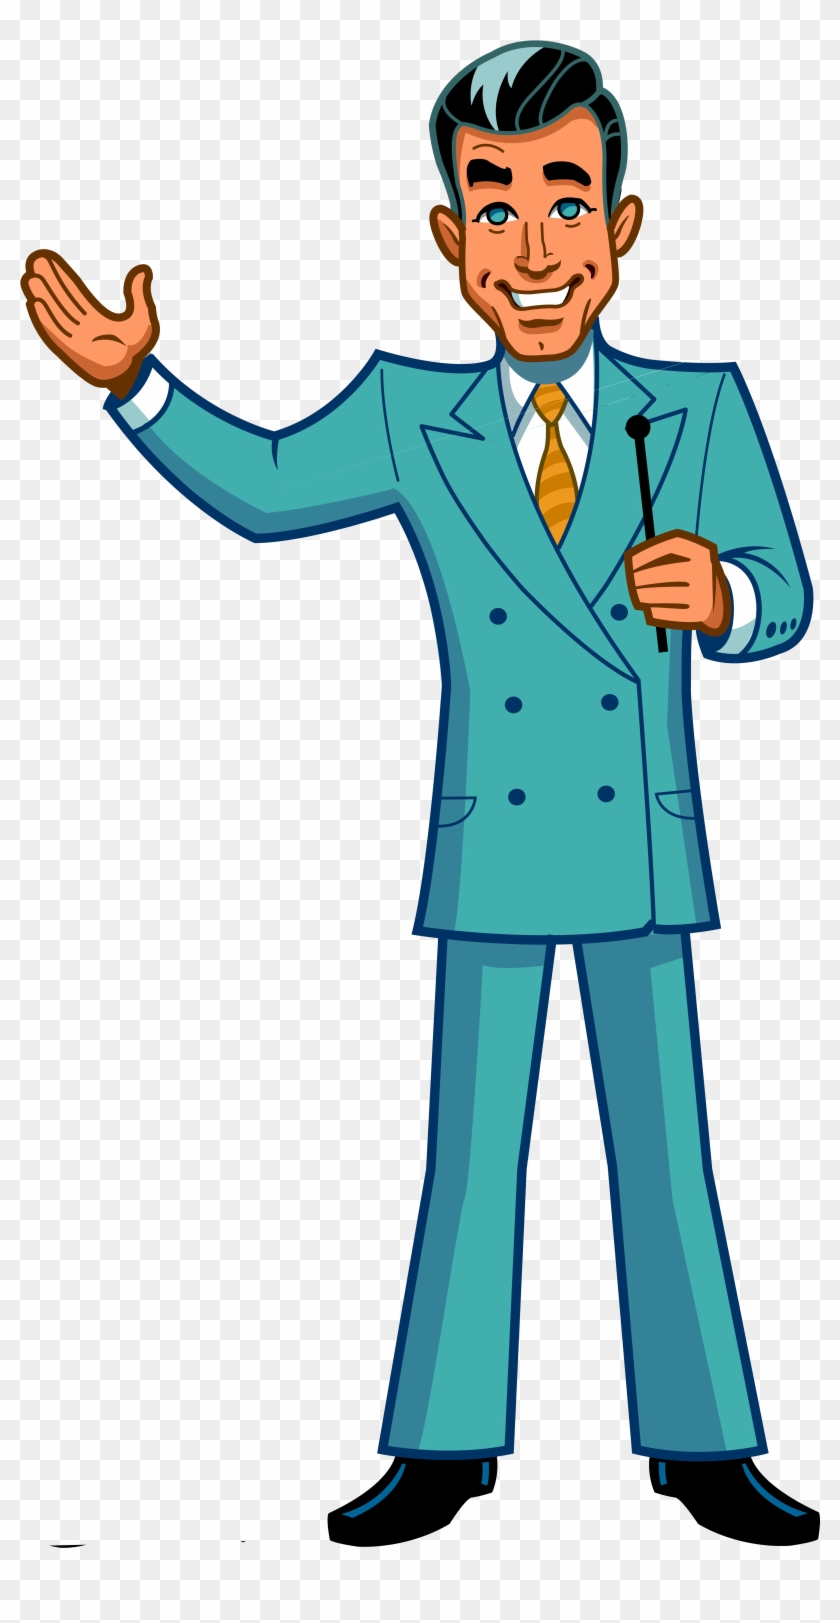 Game Show Host - Clipart Game Show Host #1674037